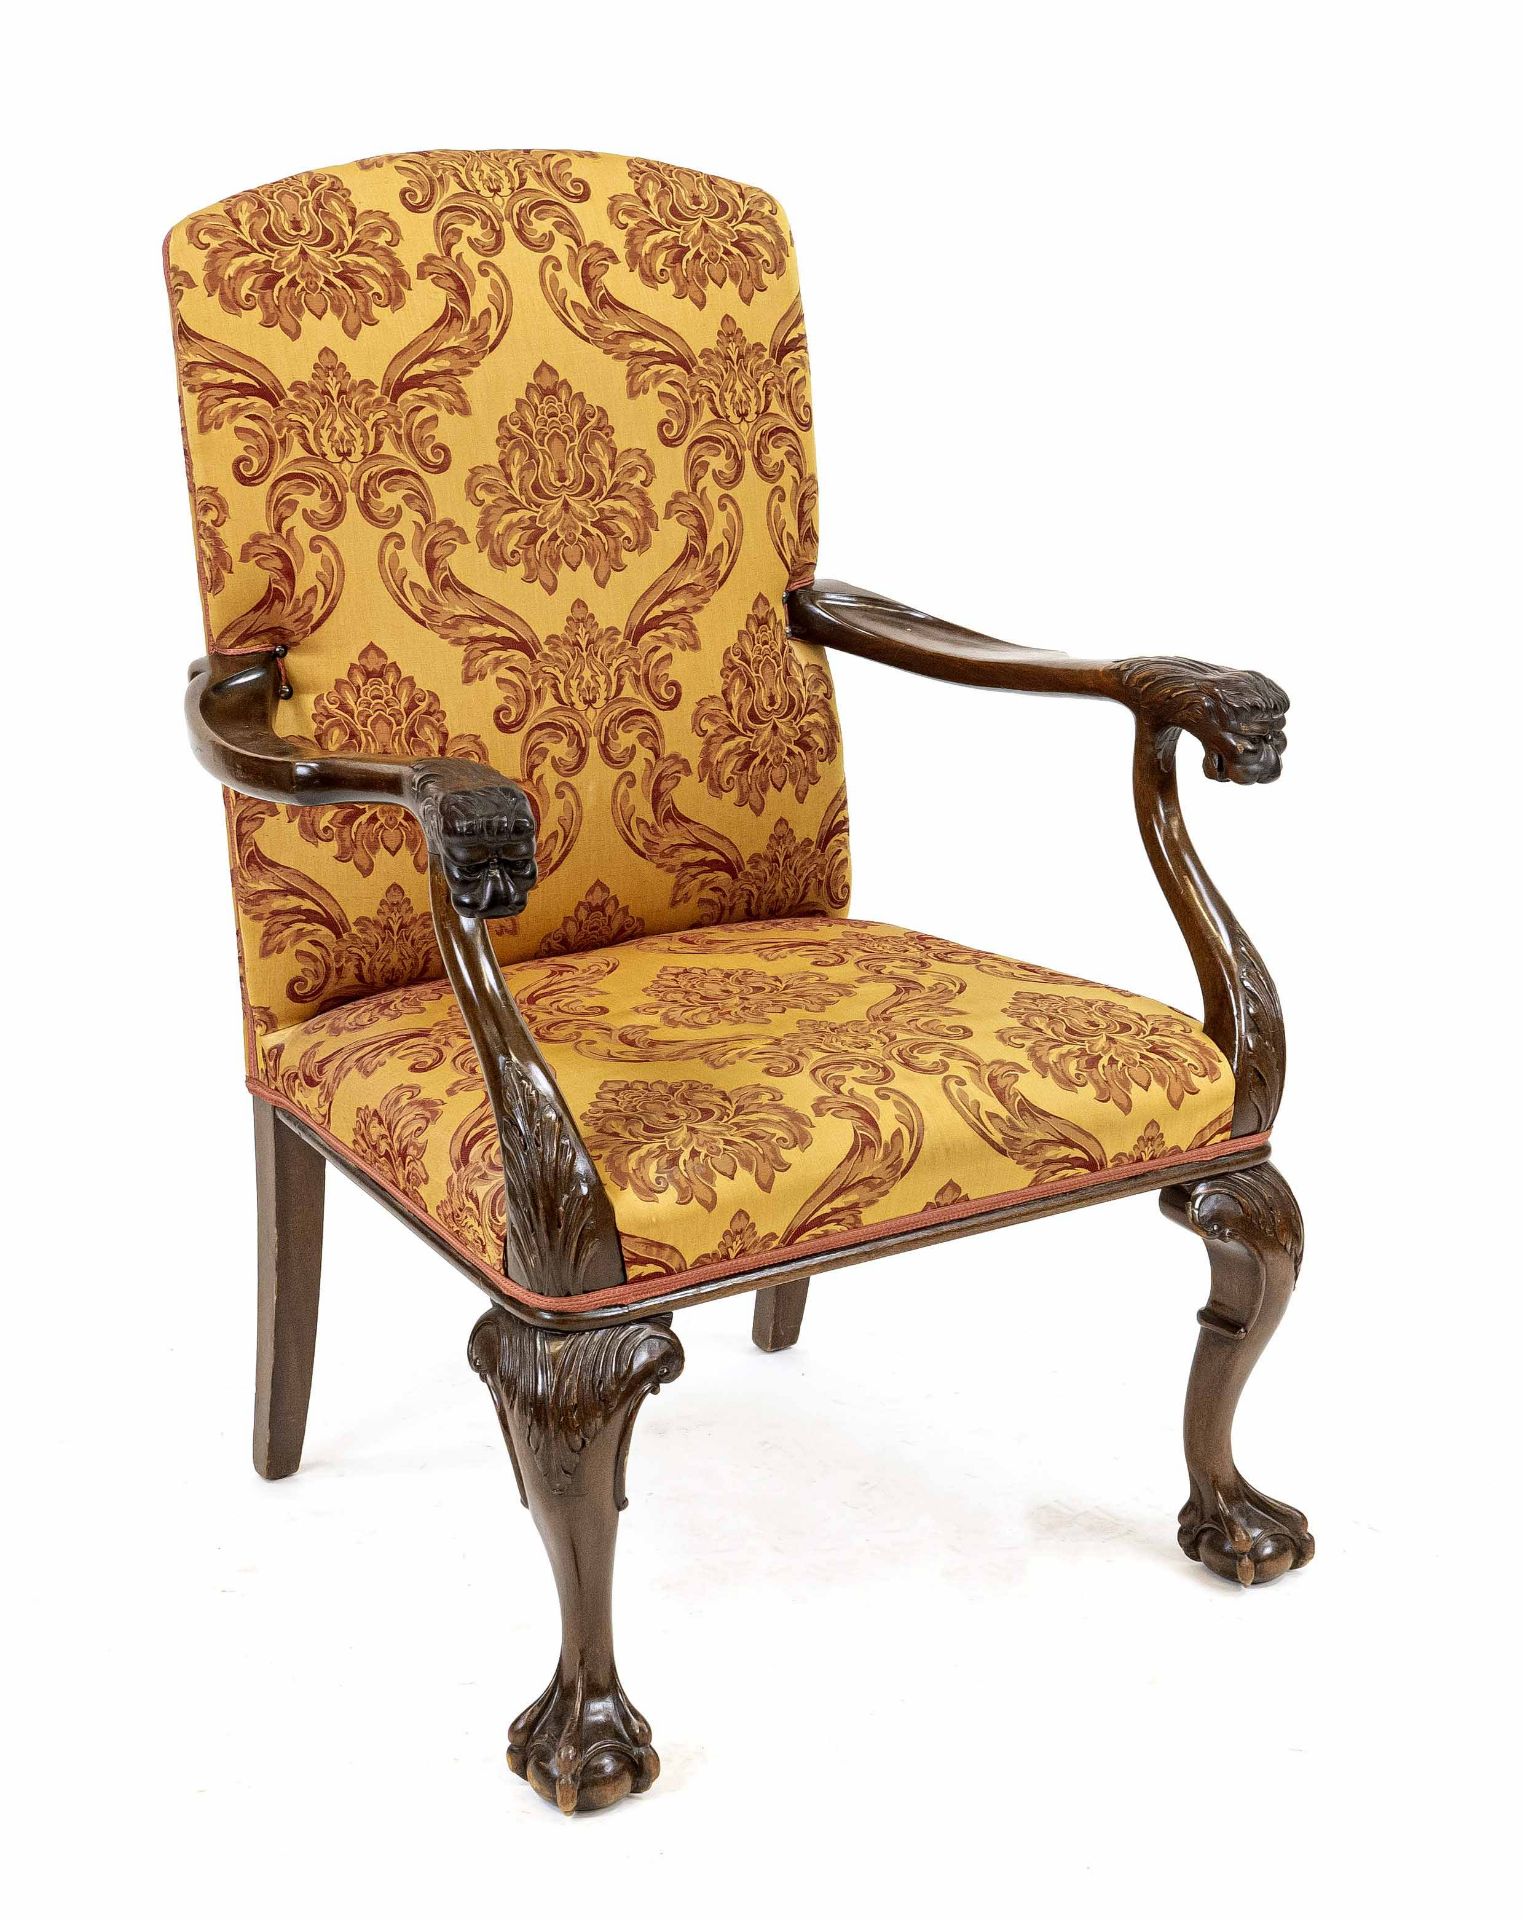 Armchair from around 1920, walnut, carved frame, armrest ends in the shape of lion heads, 103 x 67 x